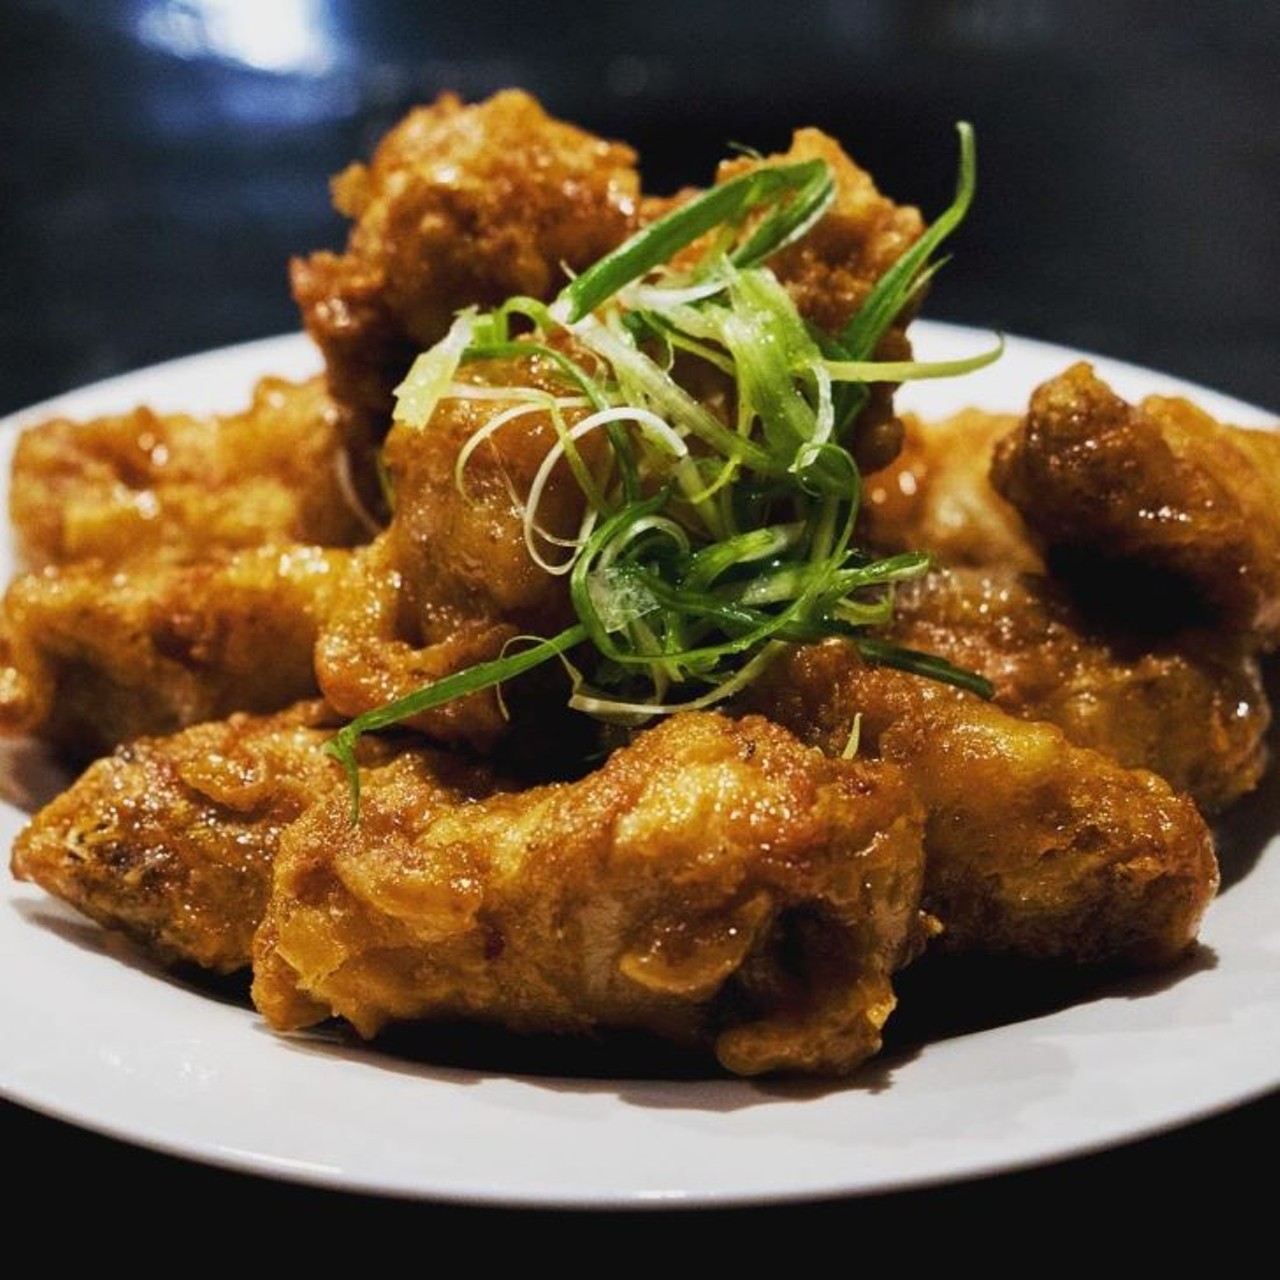 Kai Asian Street Fare 
1555 Semoran Blvd., Winter Park, 407-821 3430
Kai is serving up the crispiest of Korean-style crispy wings. Try out their original soy garlic wings.  
Photo via Kai Asian Street Fare on Facebook